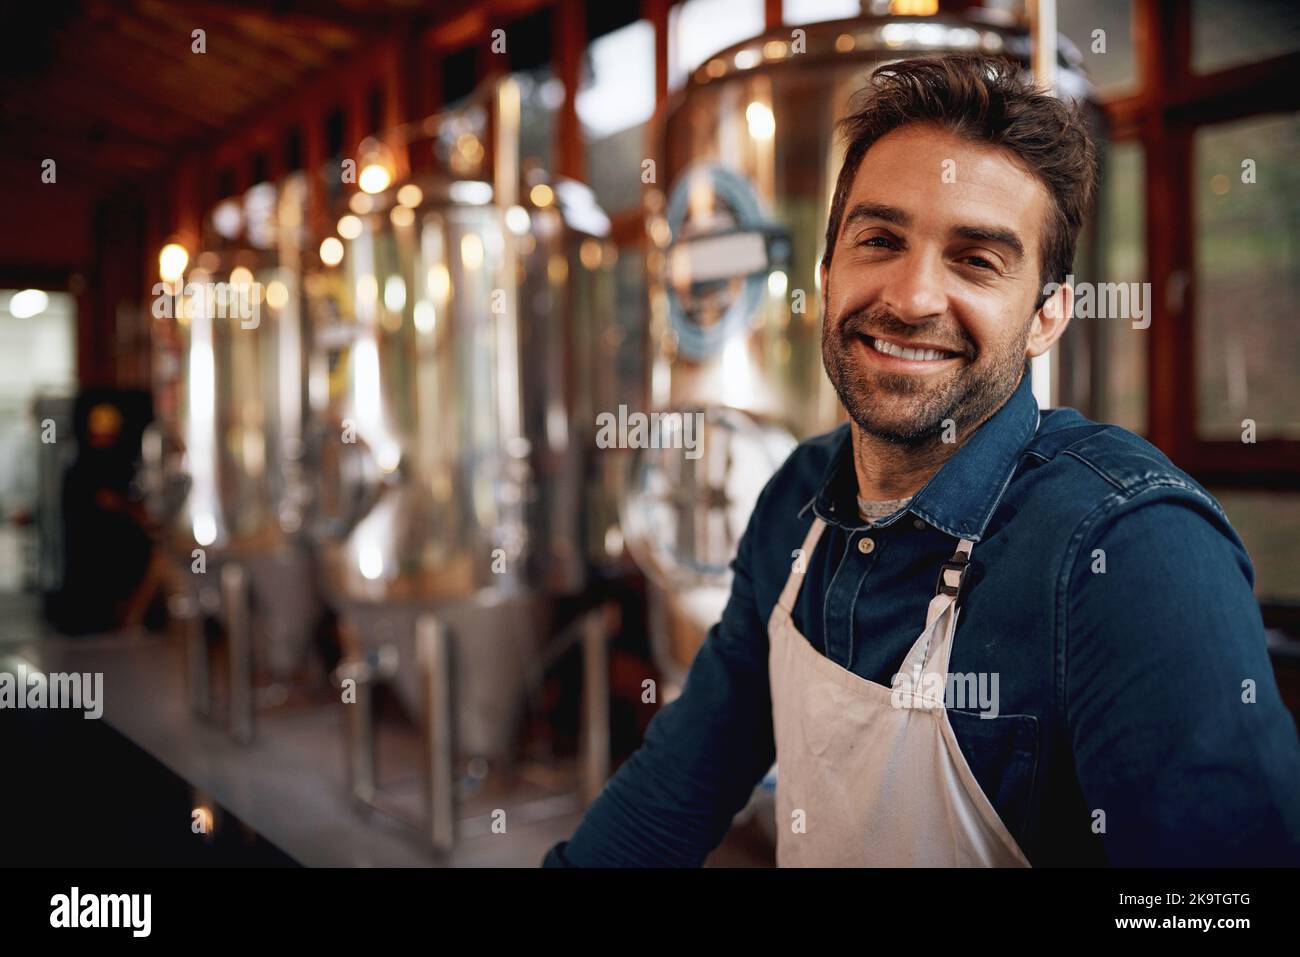 Doing what he does best. Portrait of a cheerful young barman leaning on the bar counter waiting for customers to serve inside of a beer brewery. Stock Photo